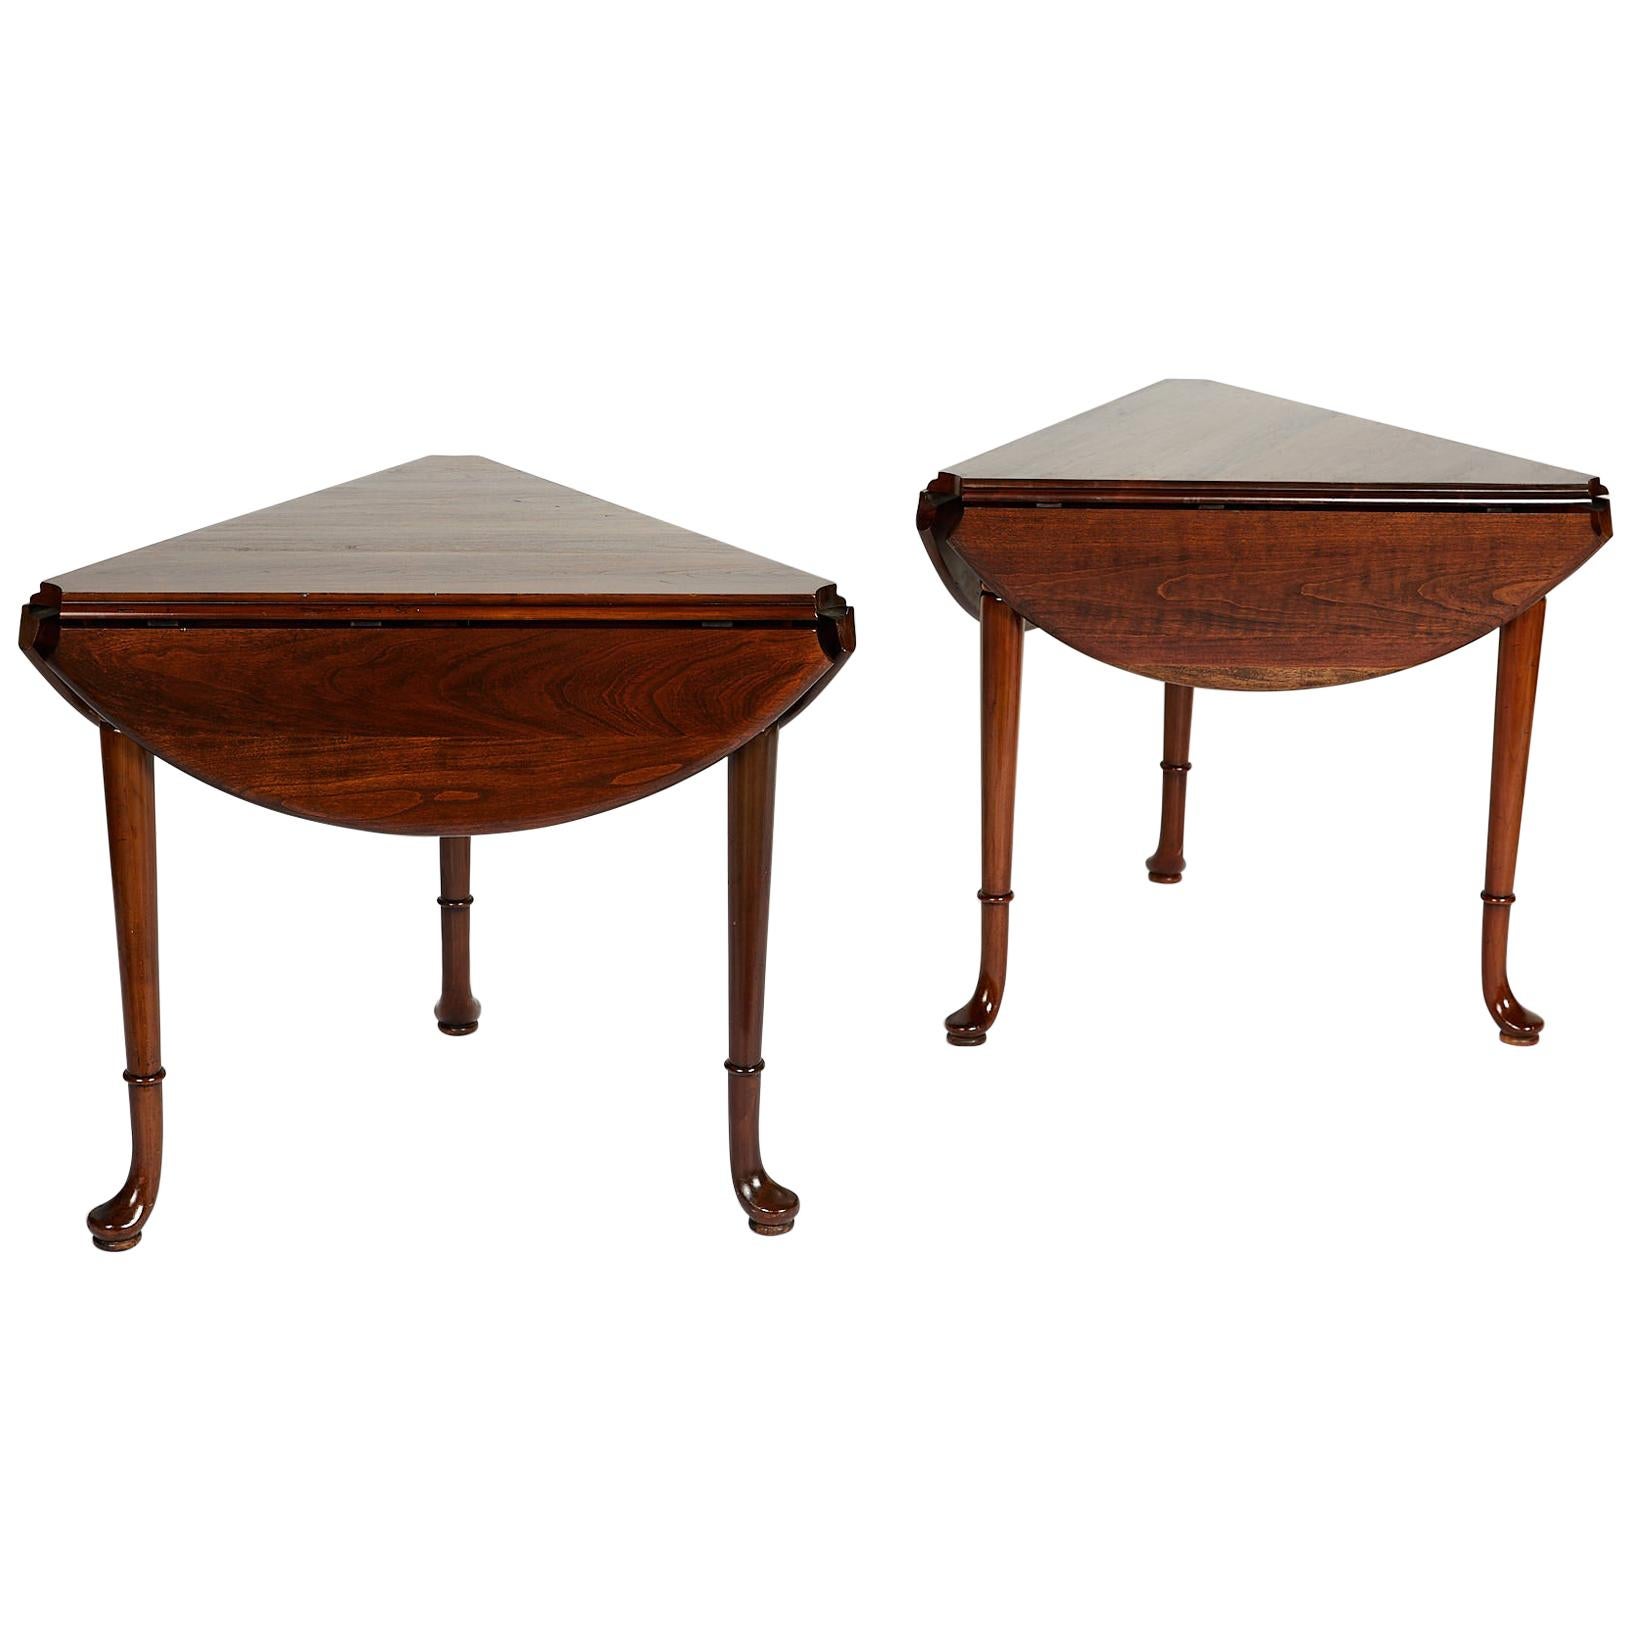 Pair of Vintage Statton Drop Leaf Tea Tables of Solid Cherry